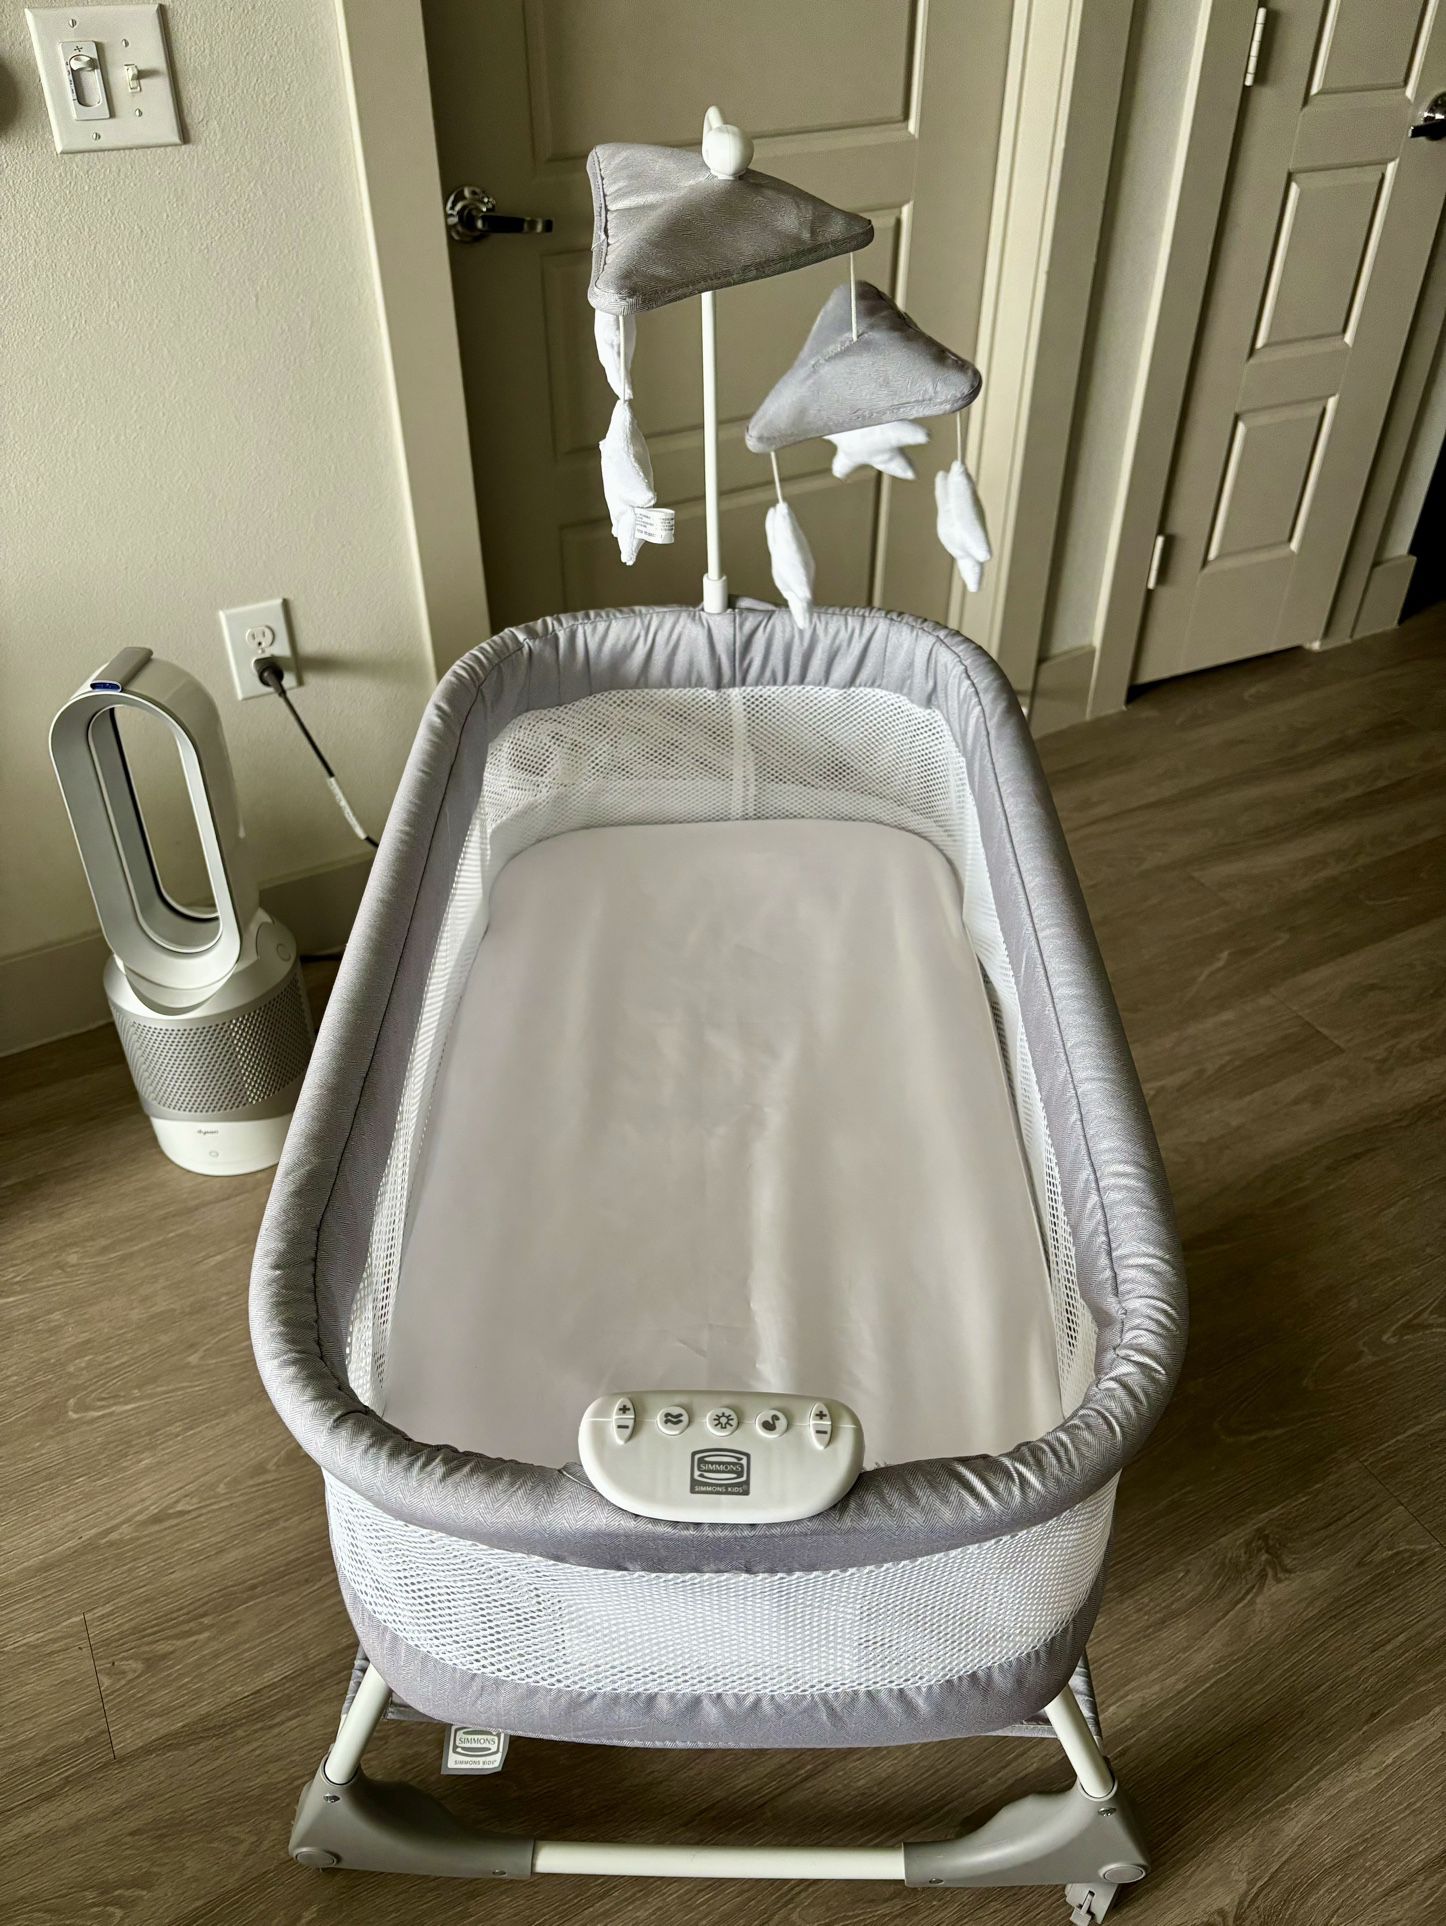 Baby Bassinet (High Quality)